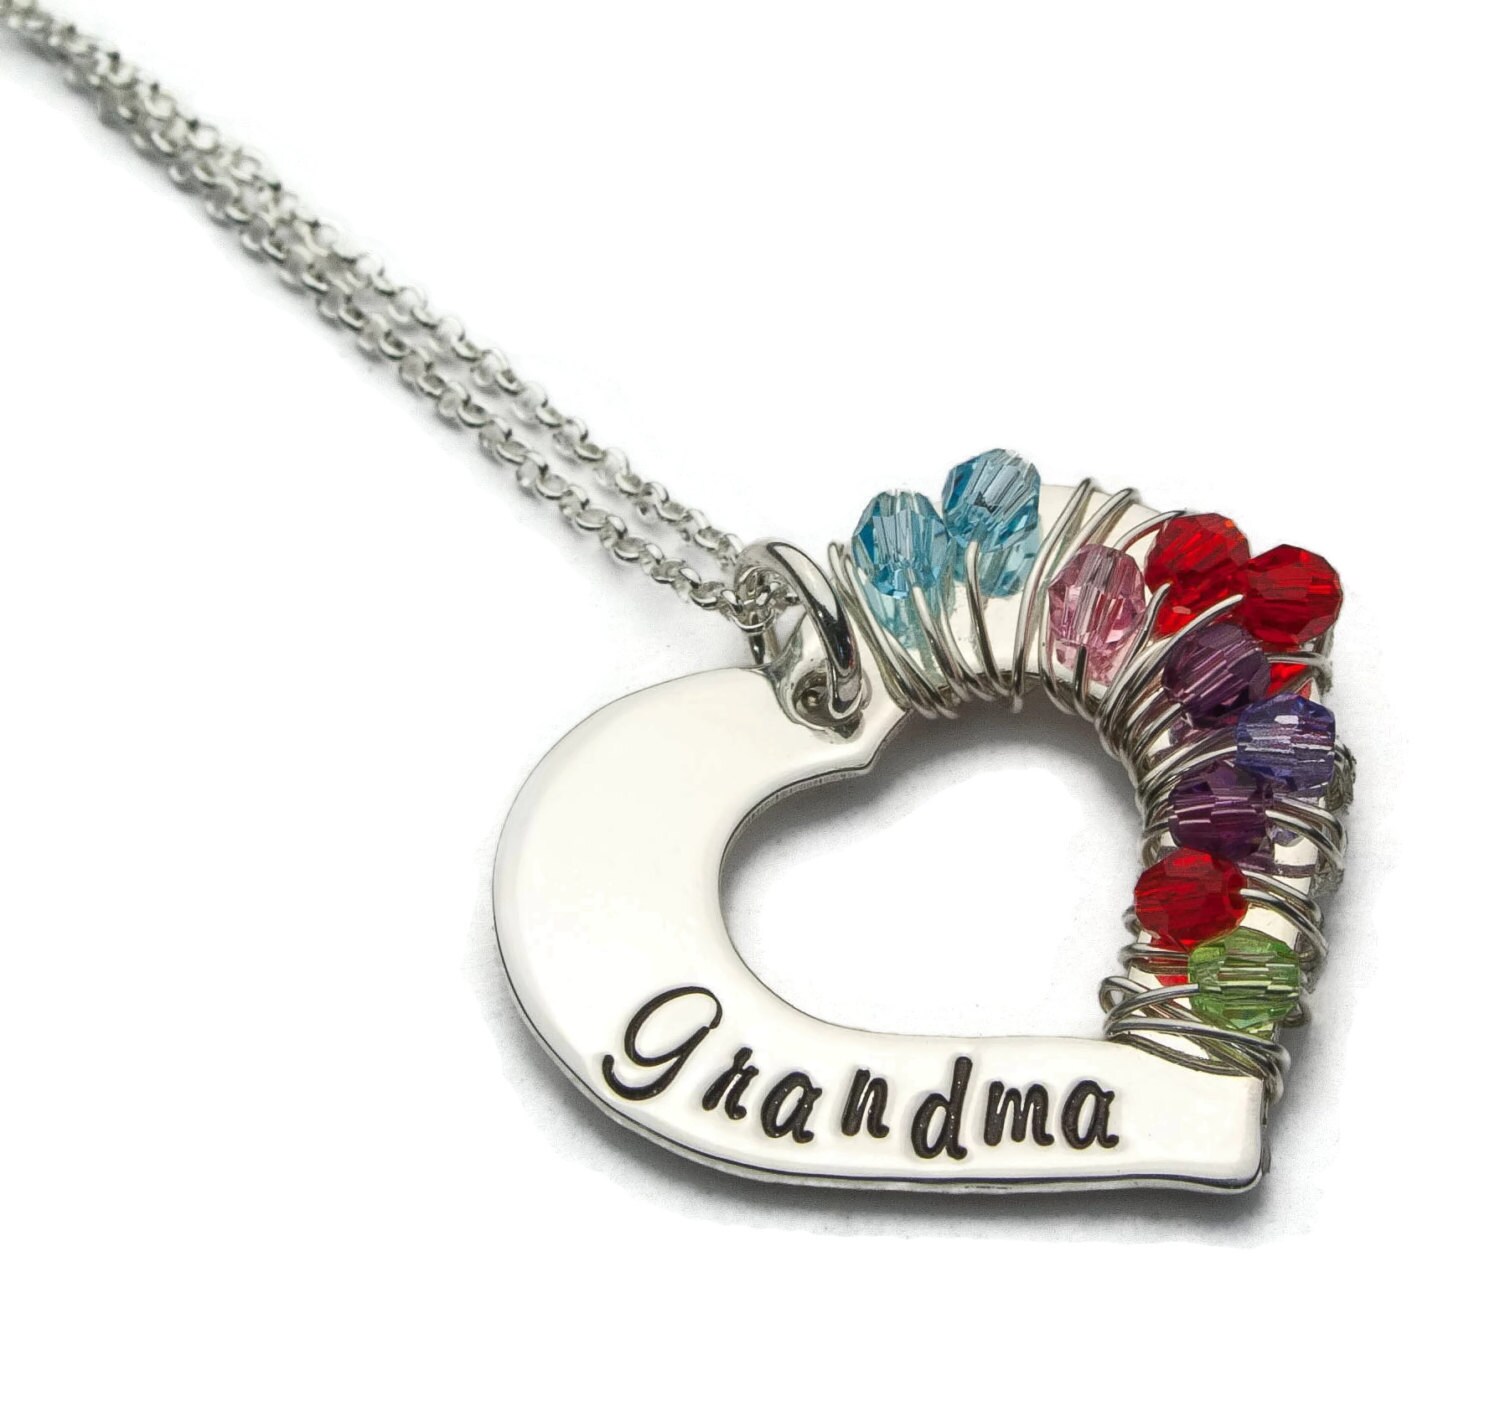 Grandmothers Necklace, Mothers Day Gift, Wrapped In Love, Birthstone Necklace, Grandma Jewelry, Grandmothers Jewelry, Heart Pendant